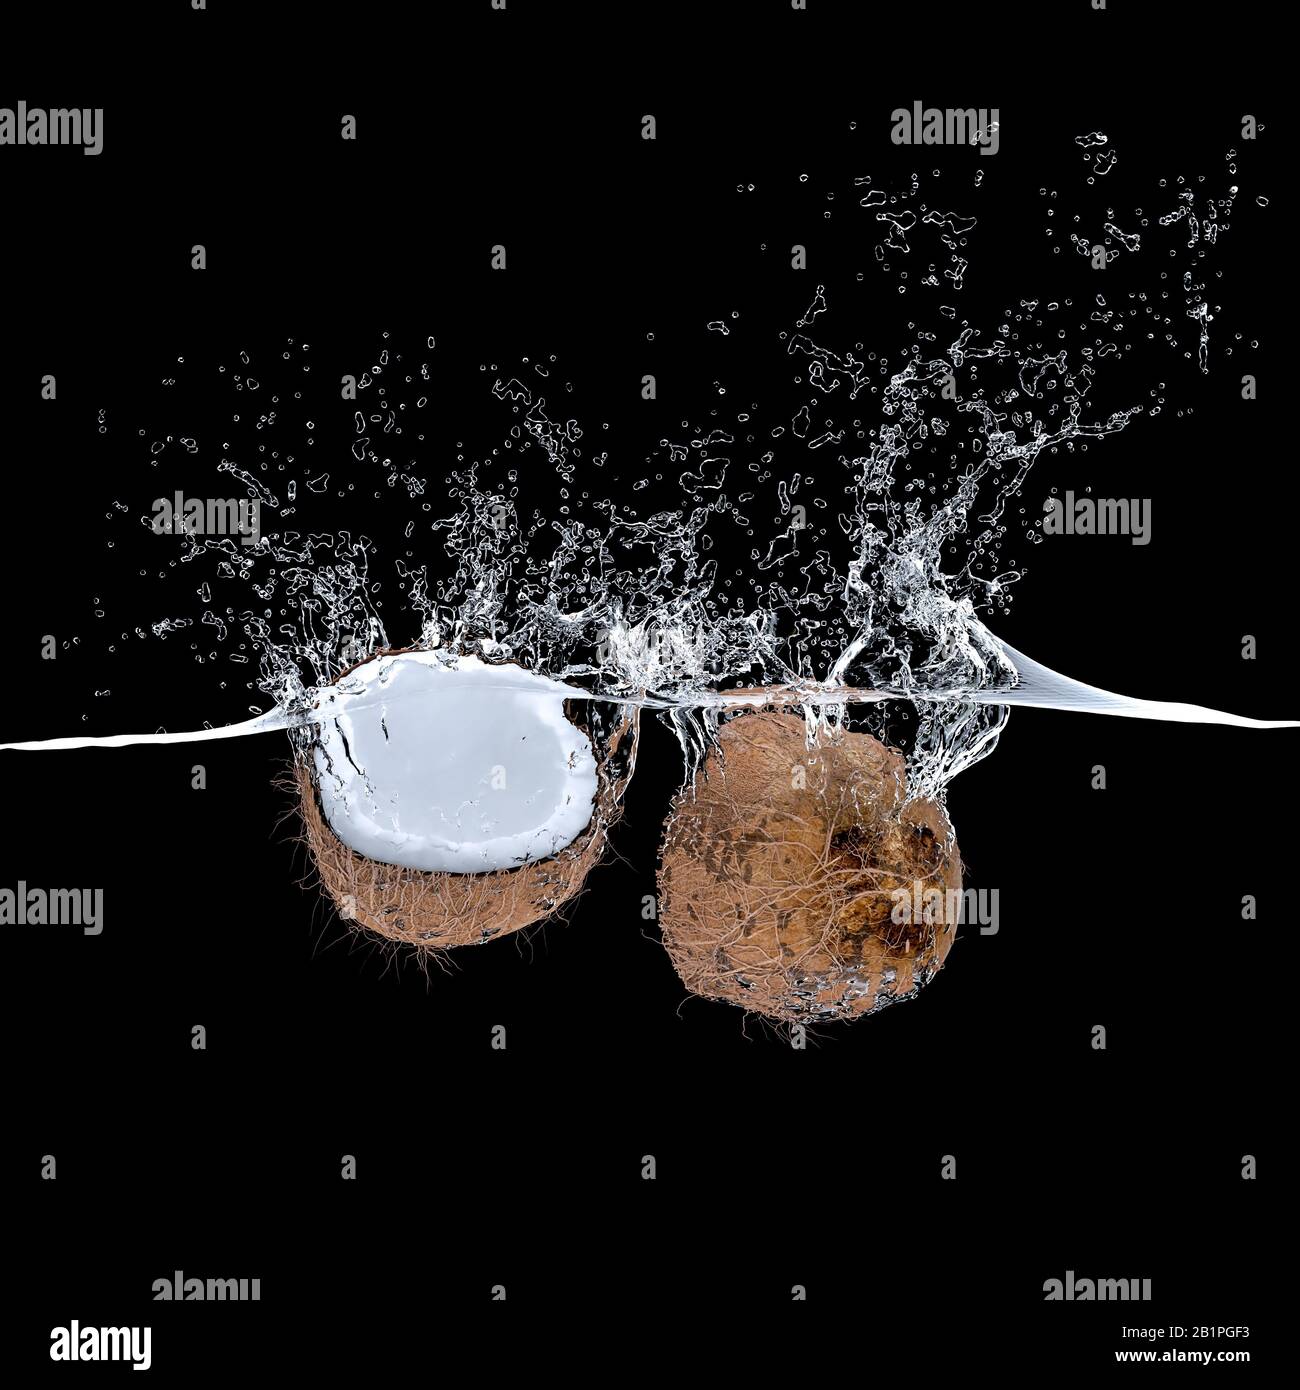 3d render of coconut fruit falling into water and creating big splashes. black background nobody around. concept of freshness and diet, tropical food. Stock Photo